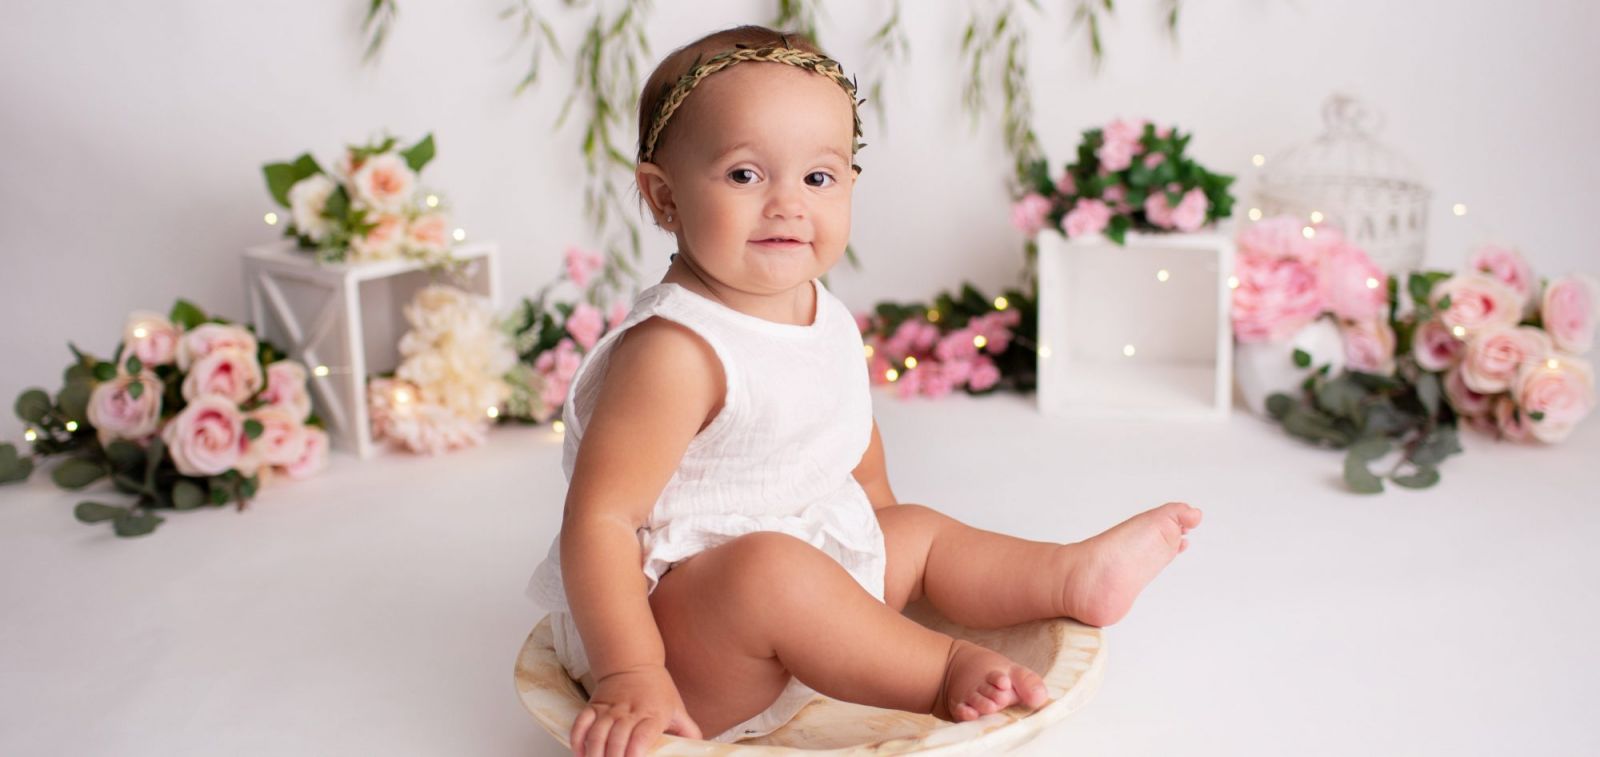 Find The Best Baby Photographer In Sydney Now!